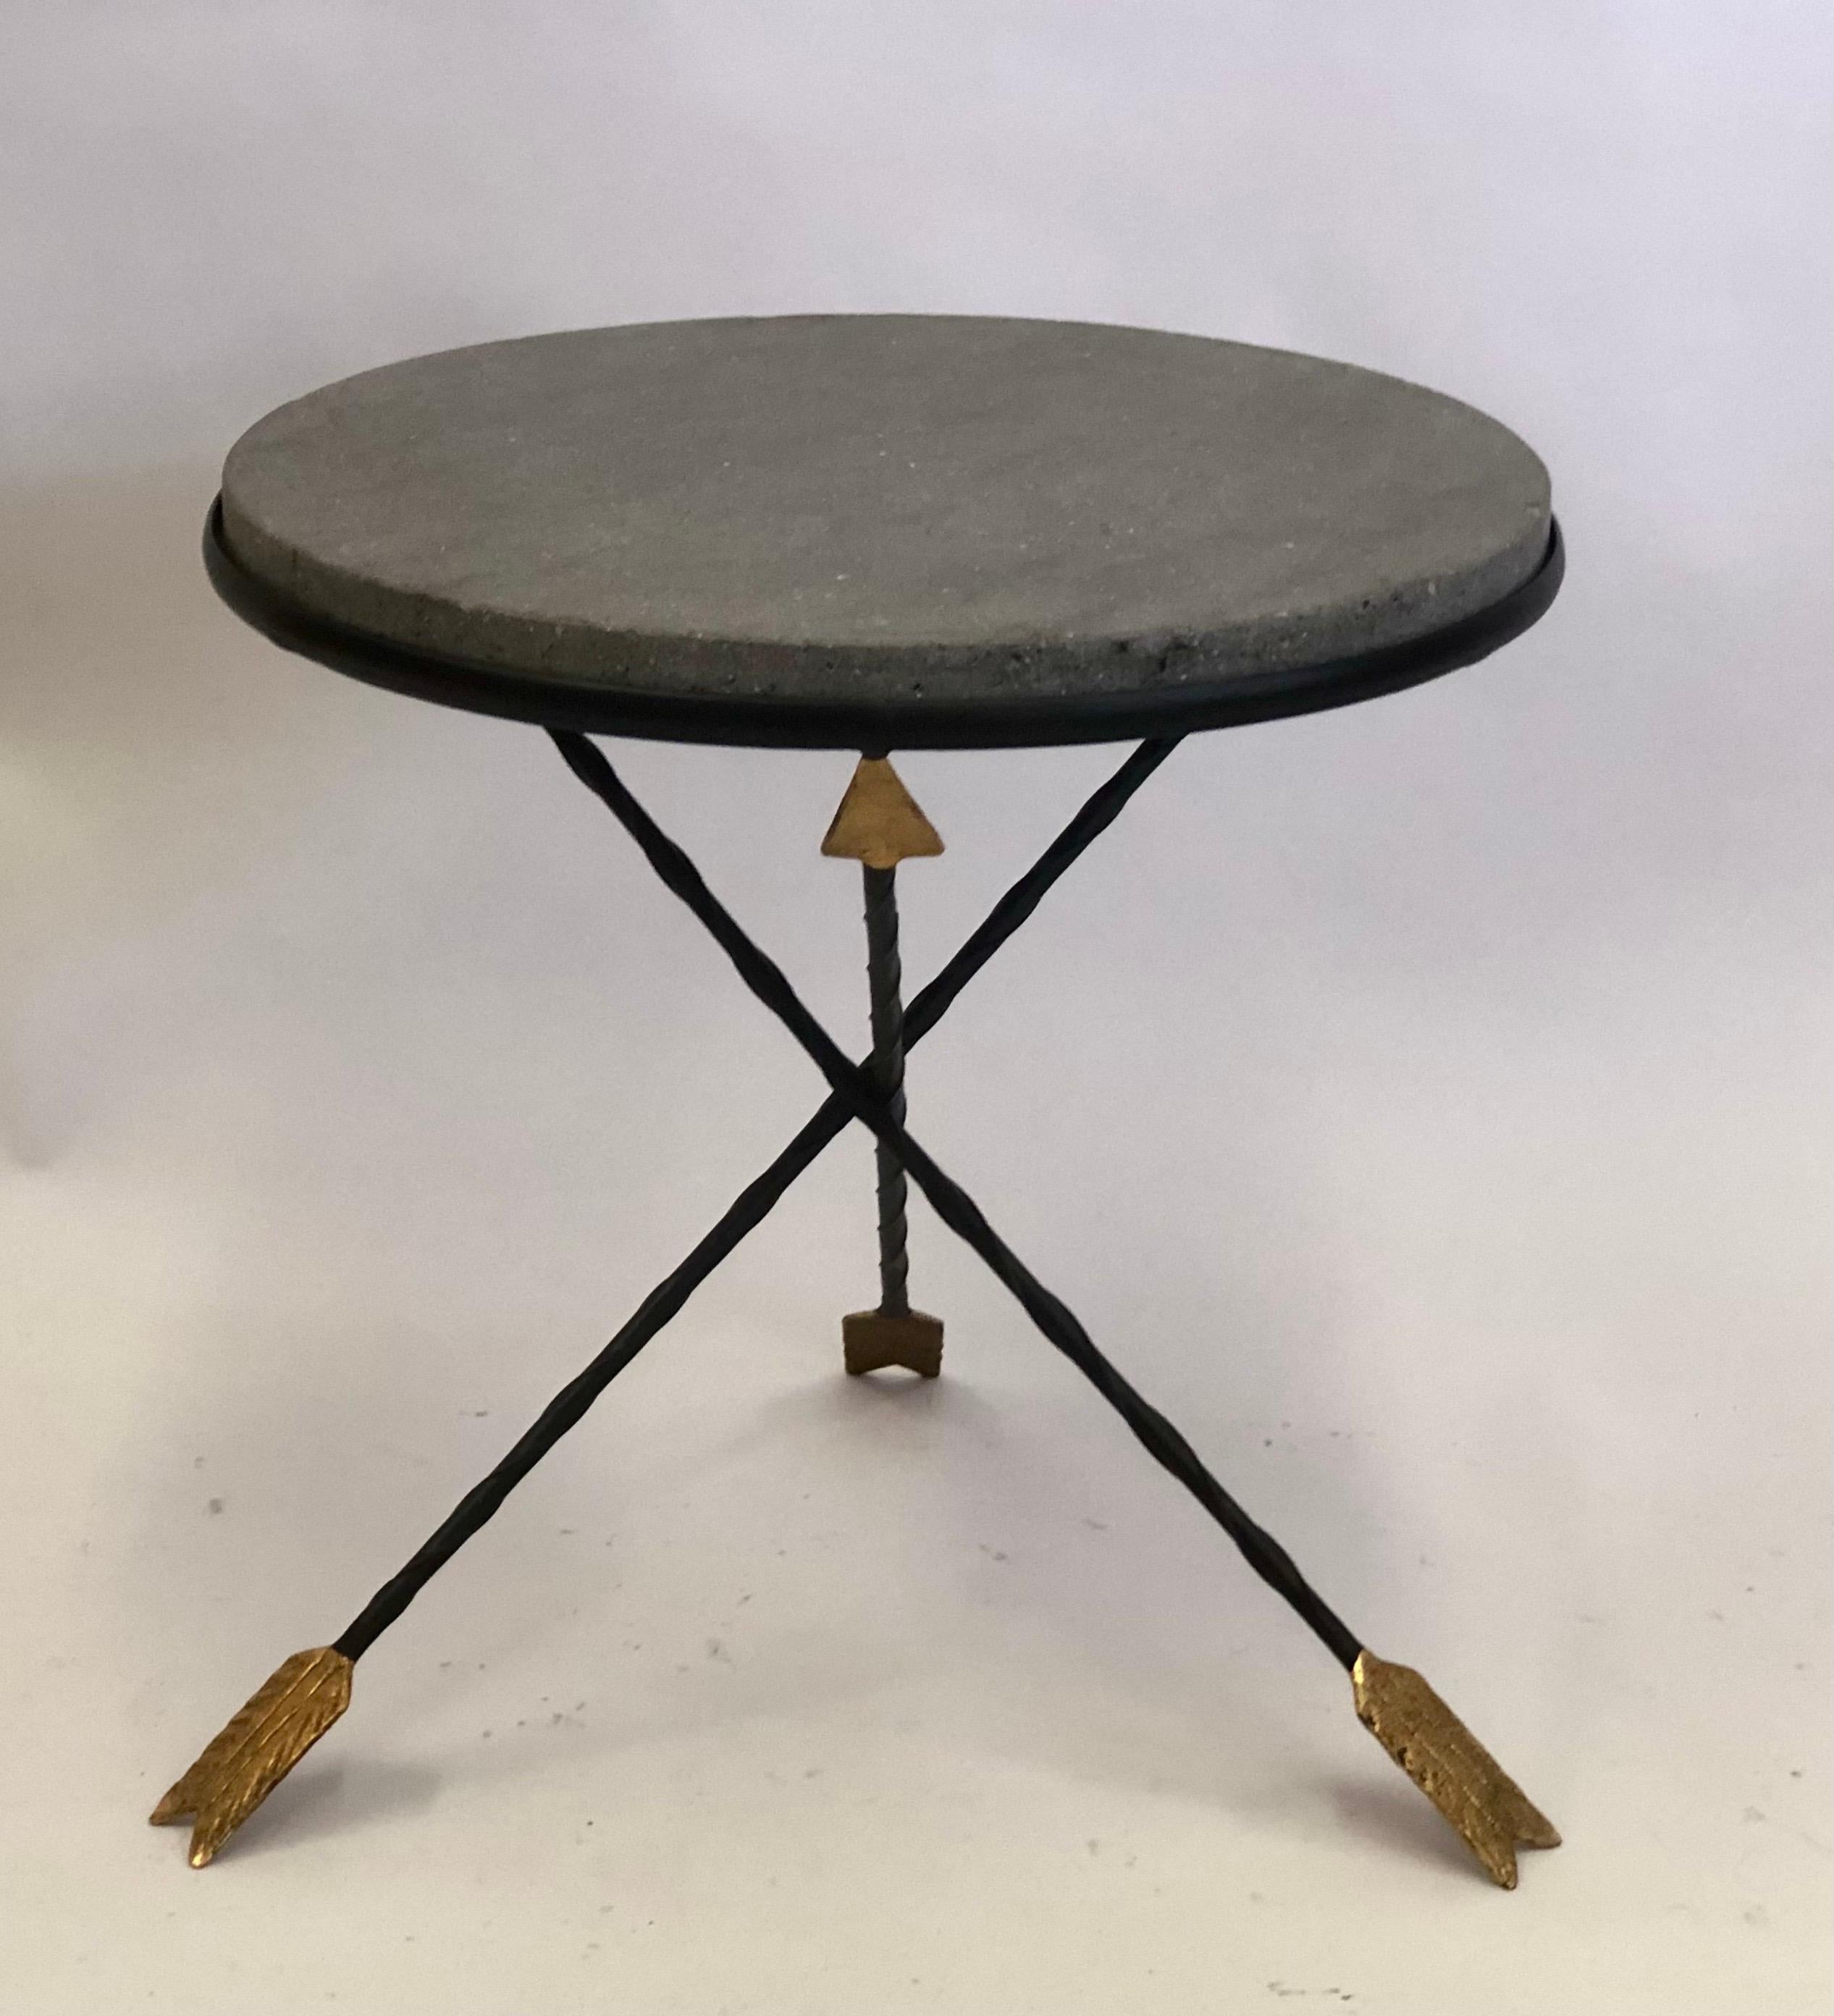 Mid-Century Modern French Modern Neoclassical Gilt Iron & Basalt Stone Side Table by Maison Jansen For Sale